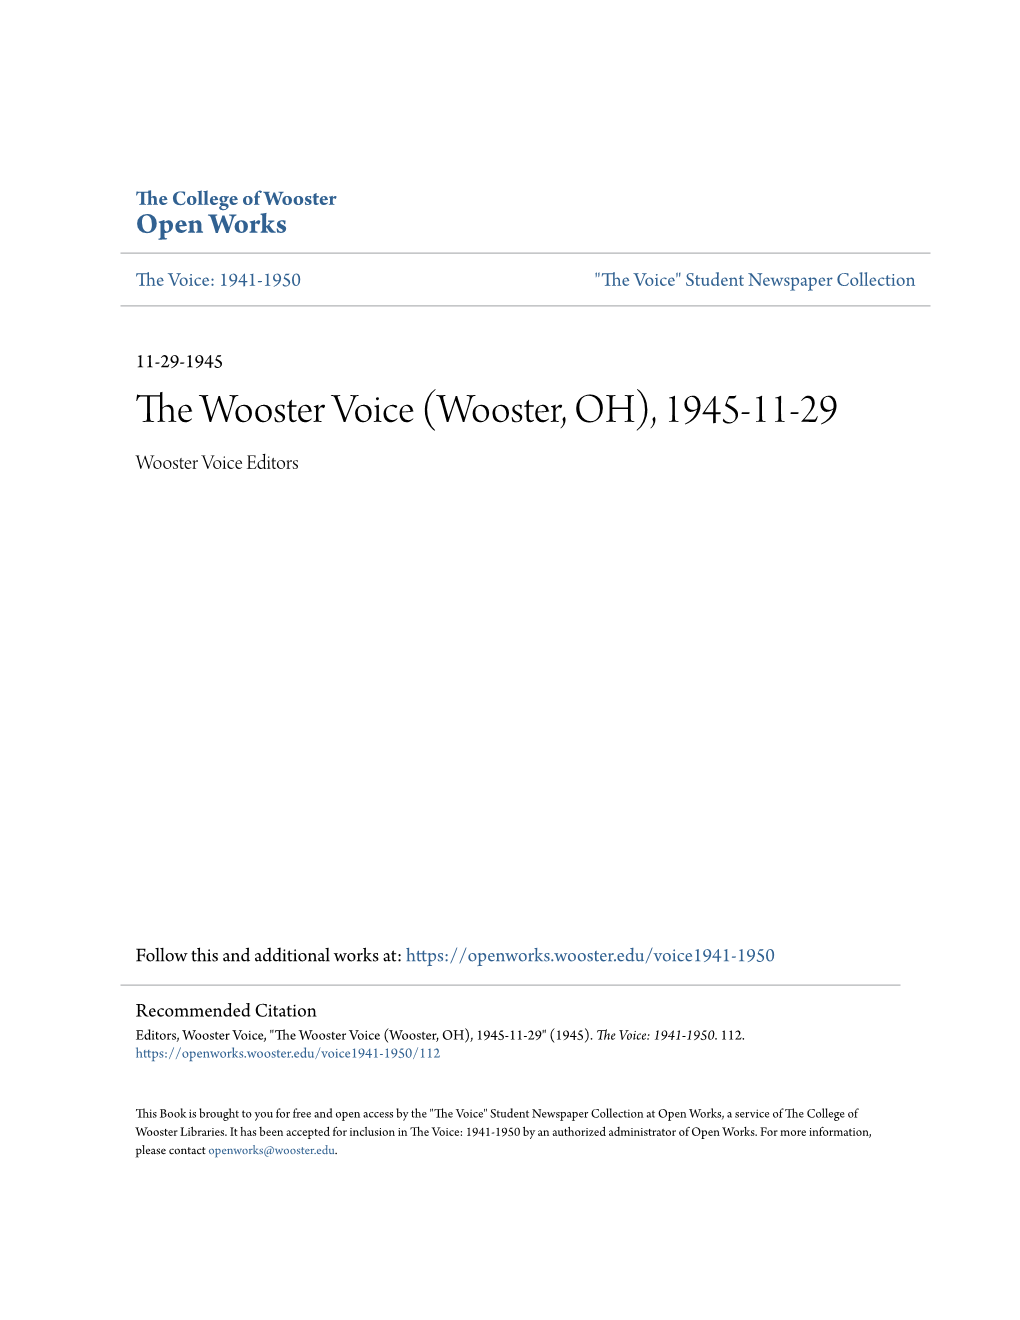 Wooster, OH), 1945-11-29 Wooster Voice Editors